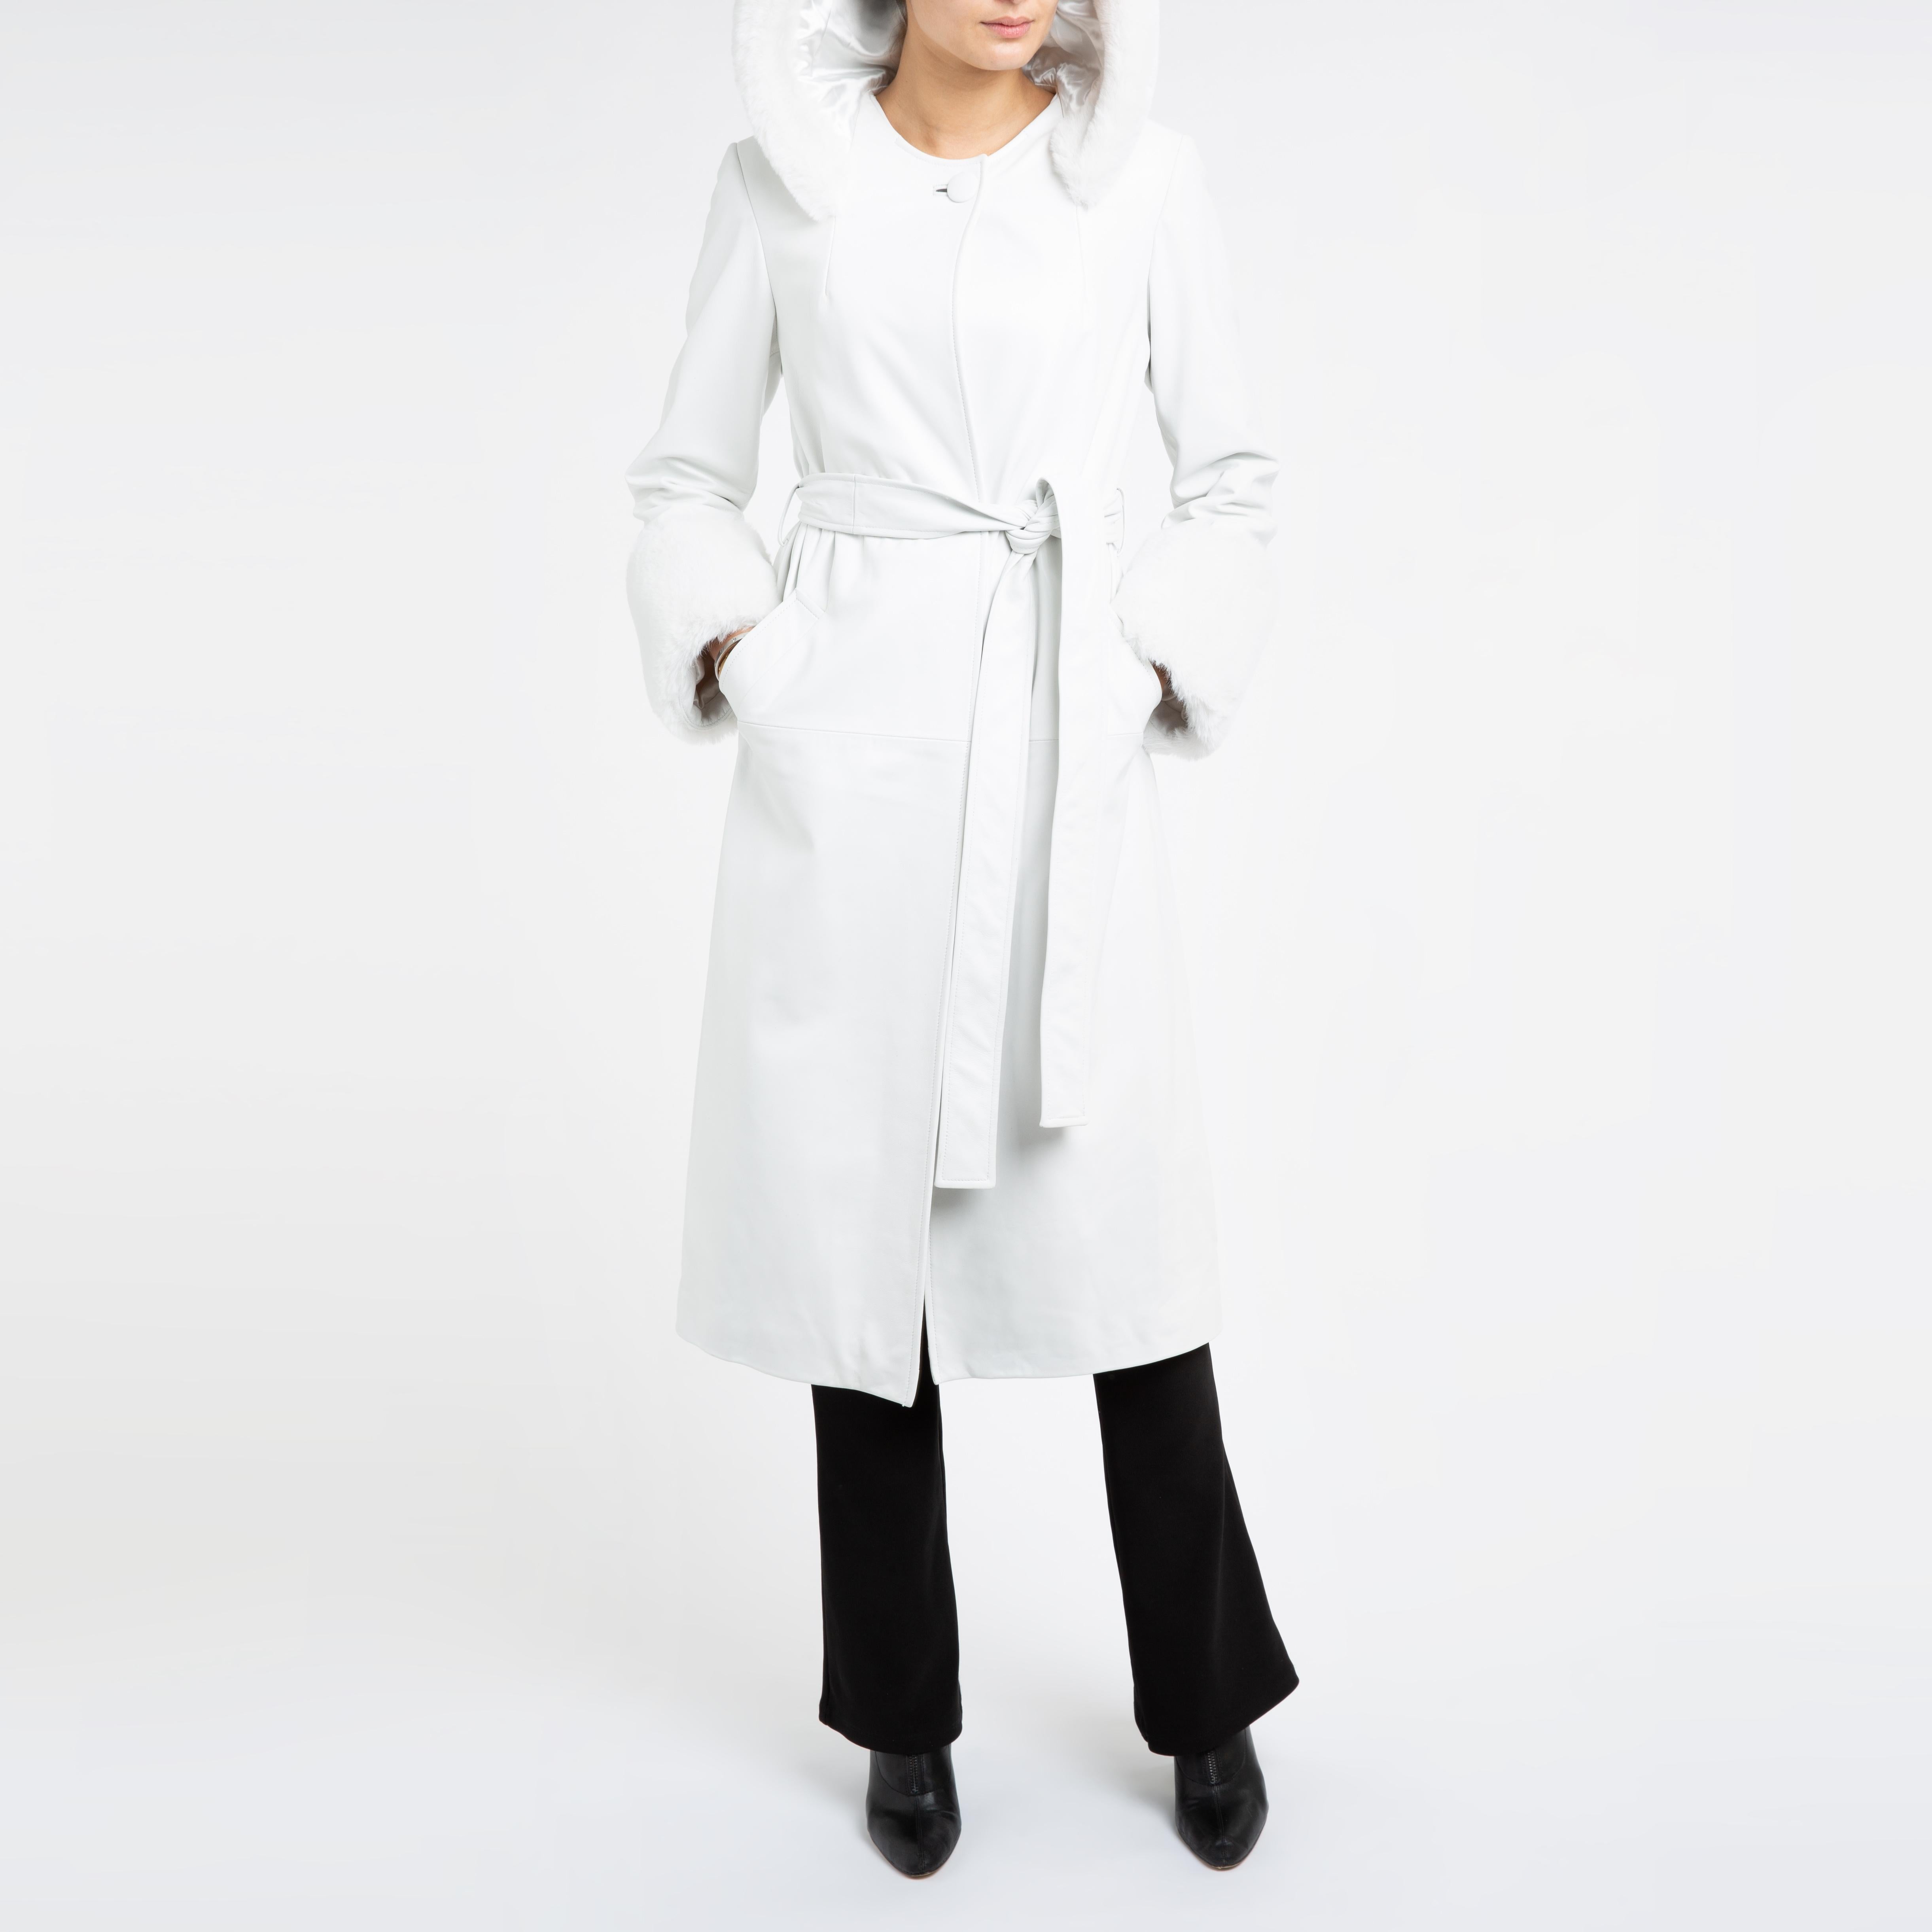 Verheyen Aurora Hooded Leather Trench Coat in White with Faux Fur - Size uk 8 For Sale 9